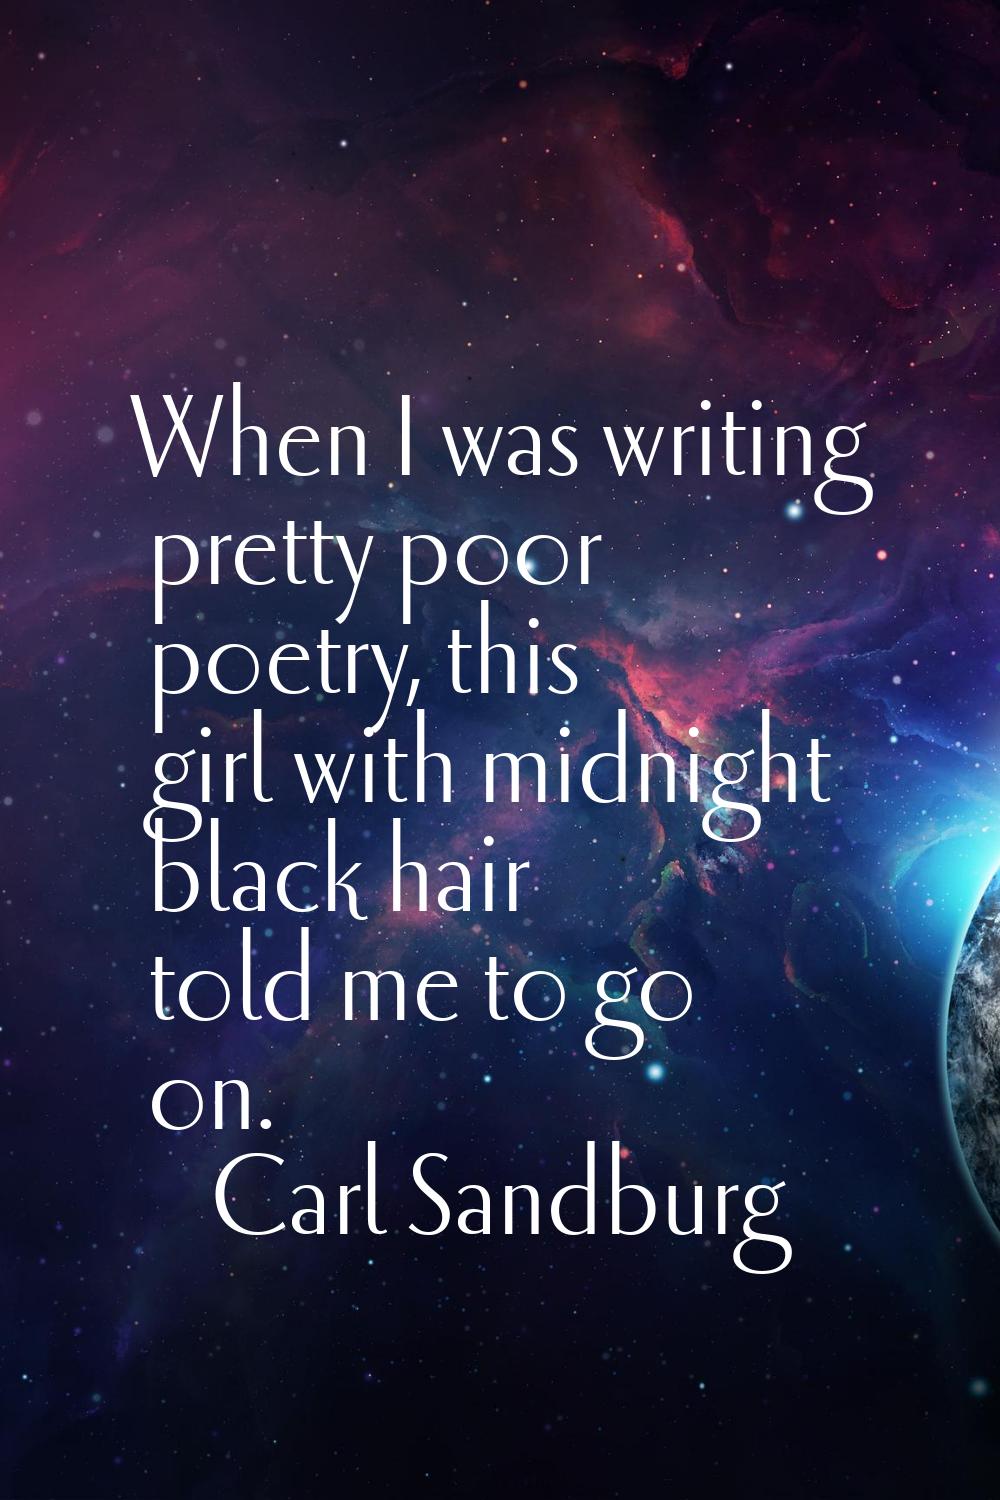 When I was writing pretty poor poetry, this girl with midnight black hair told me to go on.